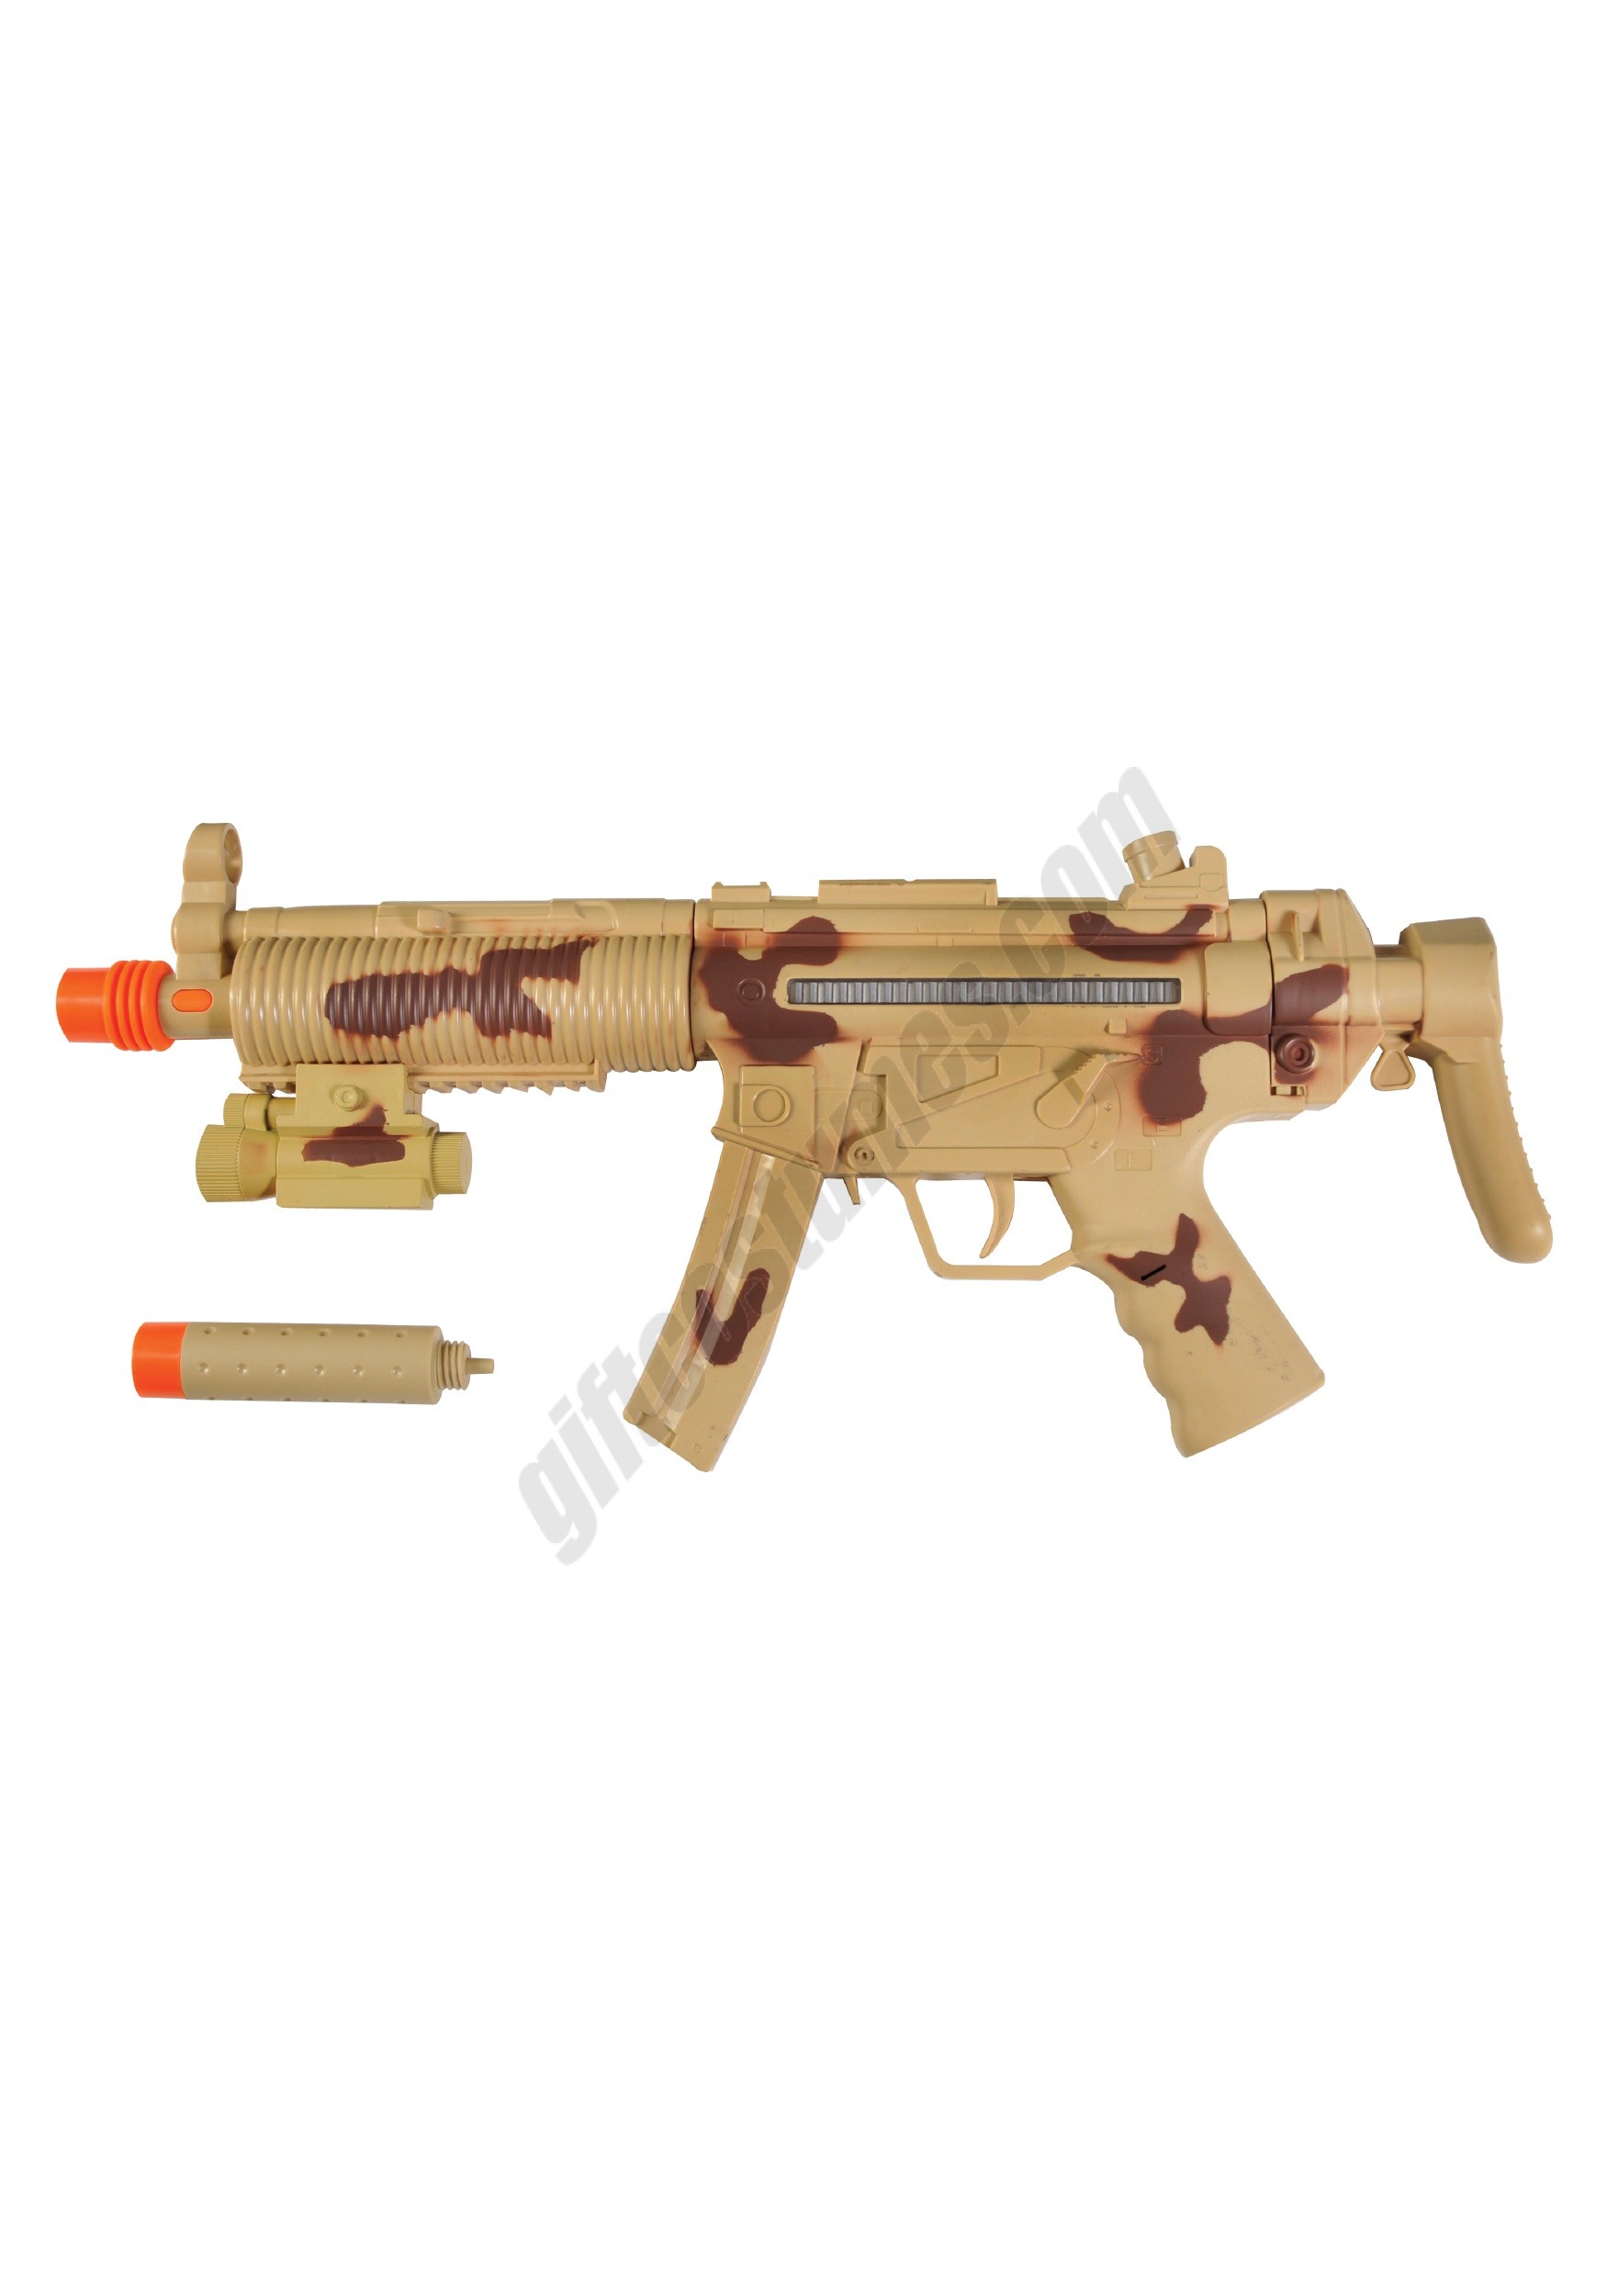 Toy Tactical Machine Gun  Promotions - Toy Tactical Machine Gun  Promotions